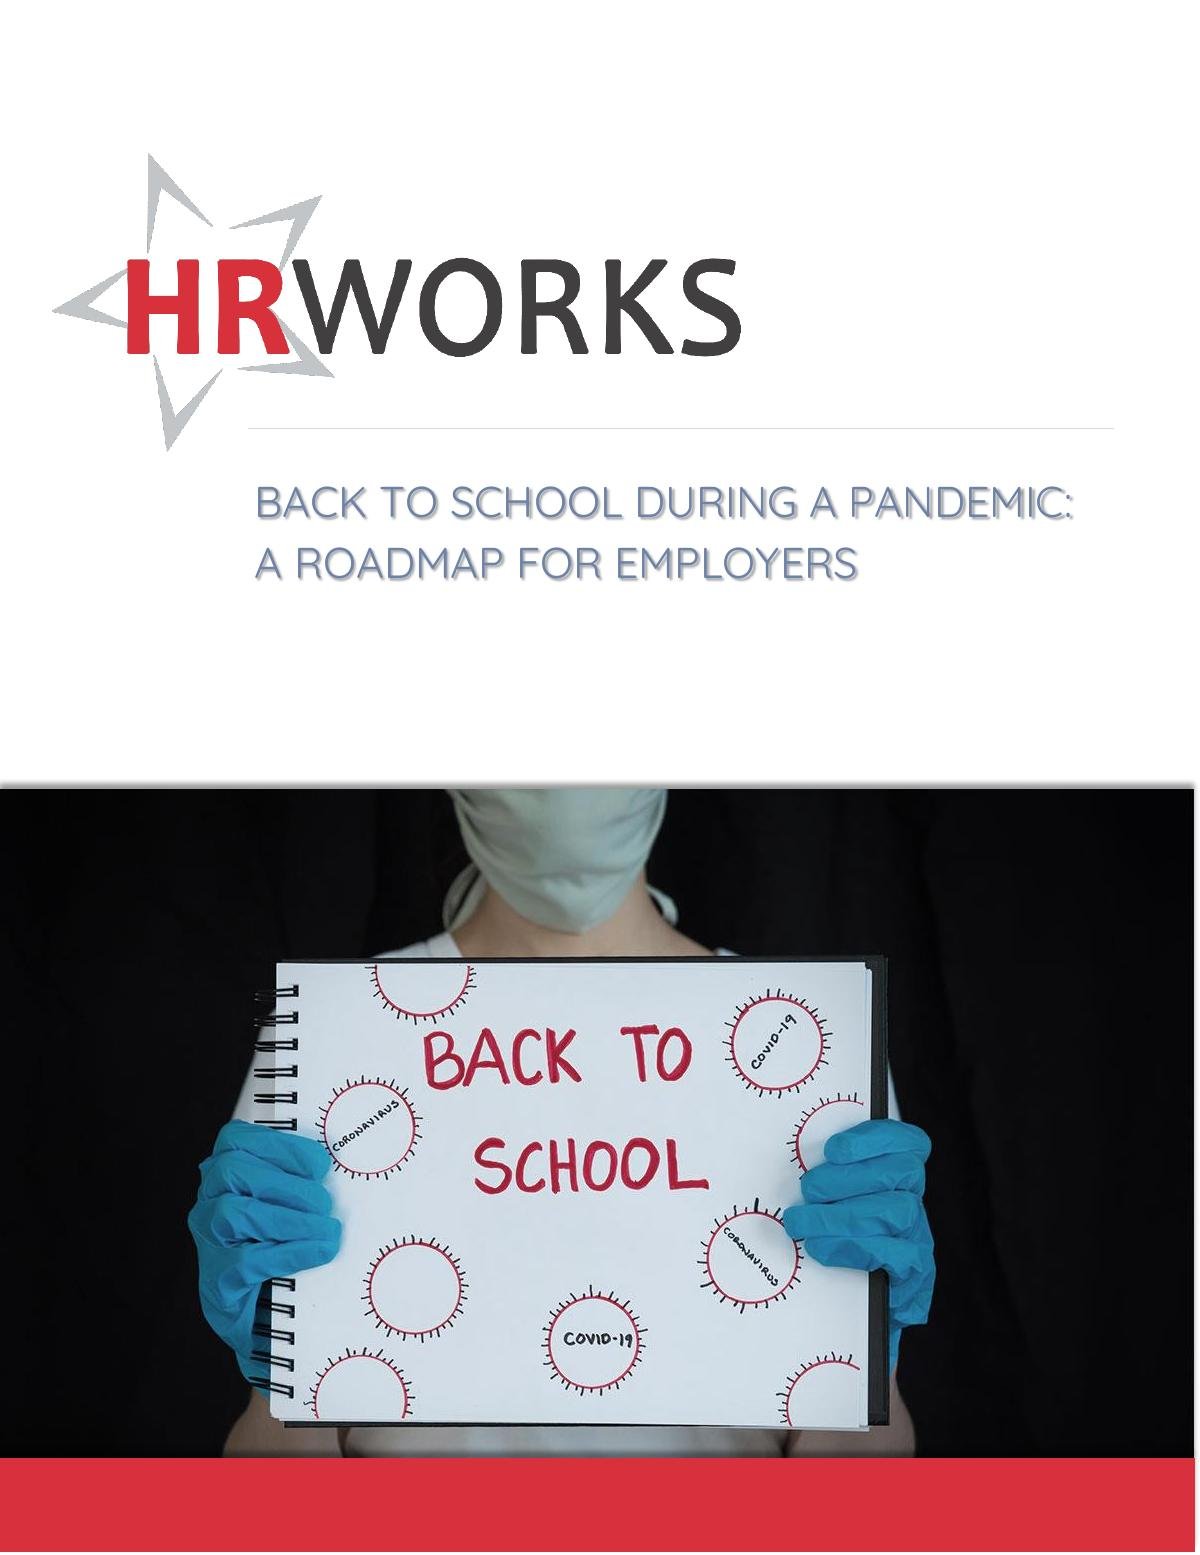 Back to School During A Pandemic: A Roadmap for Employers